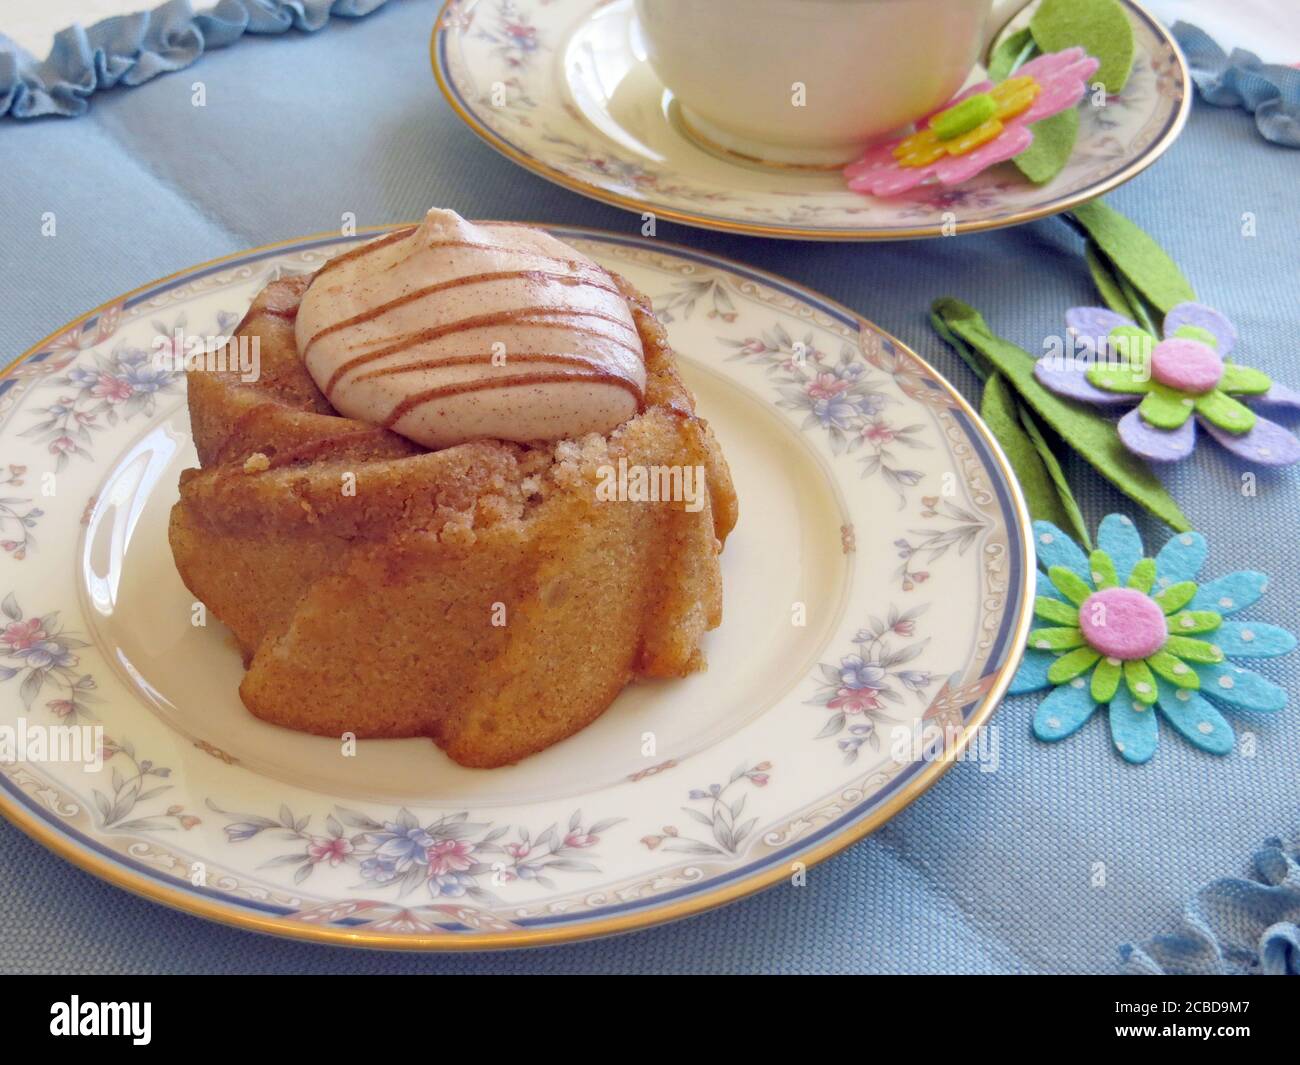 Small cake with frosting on a small china plate Stock Photo